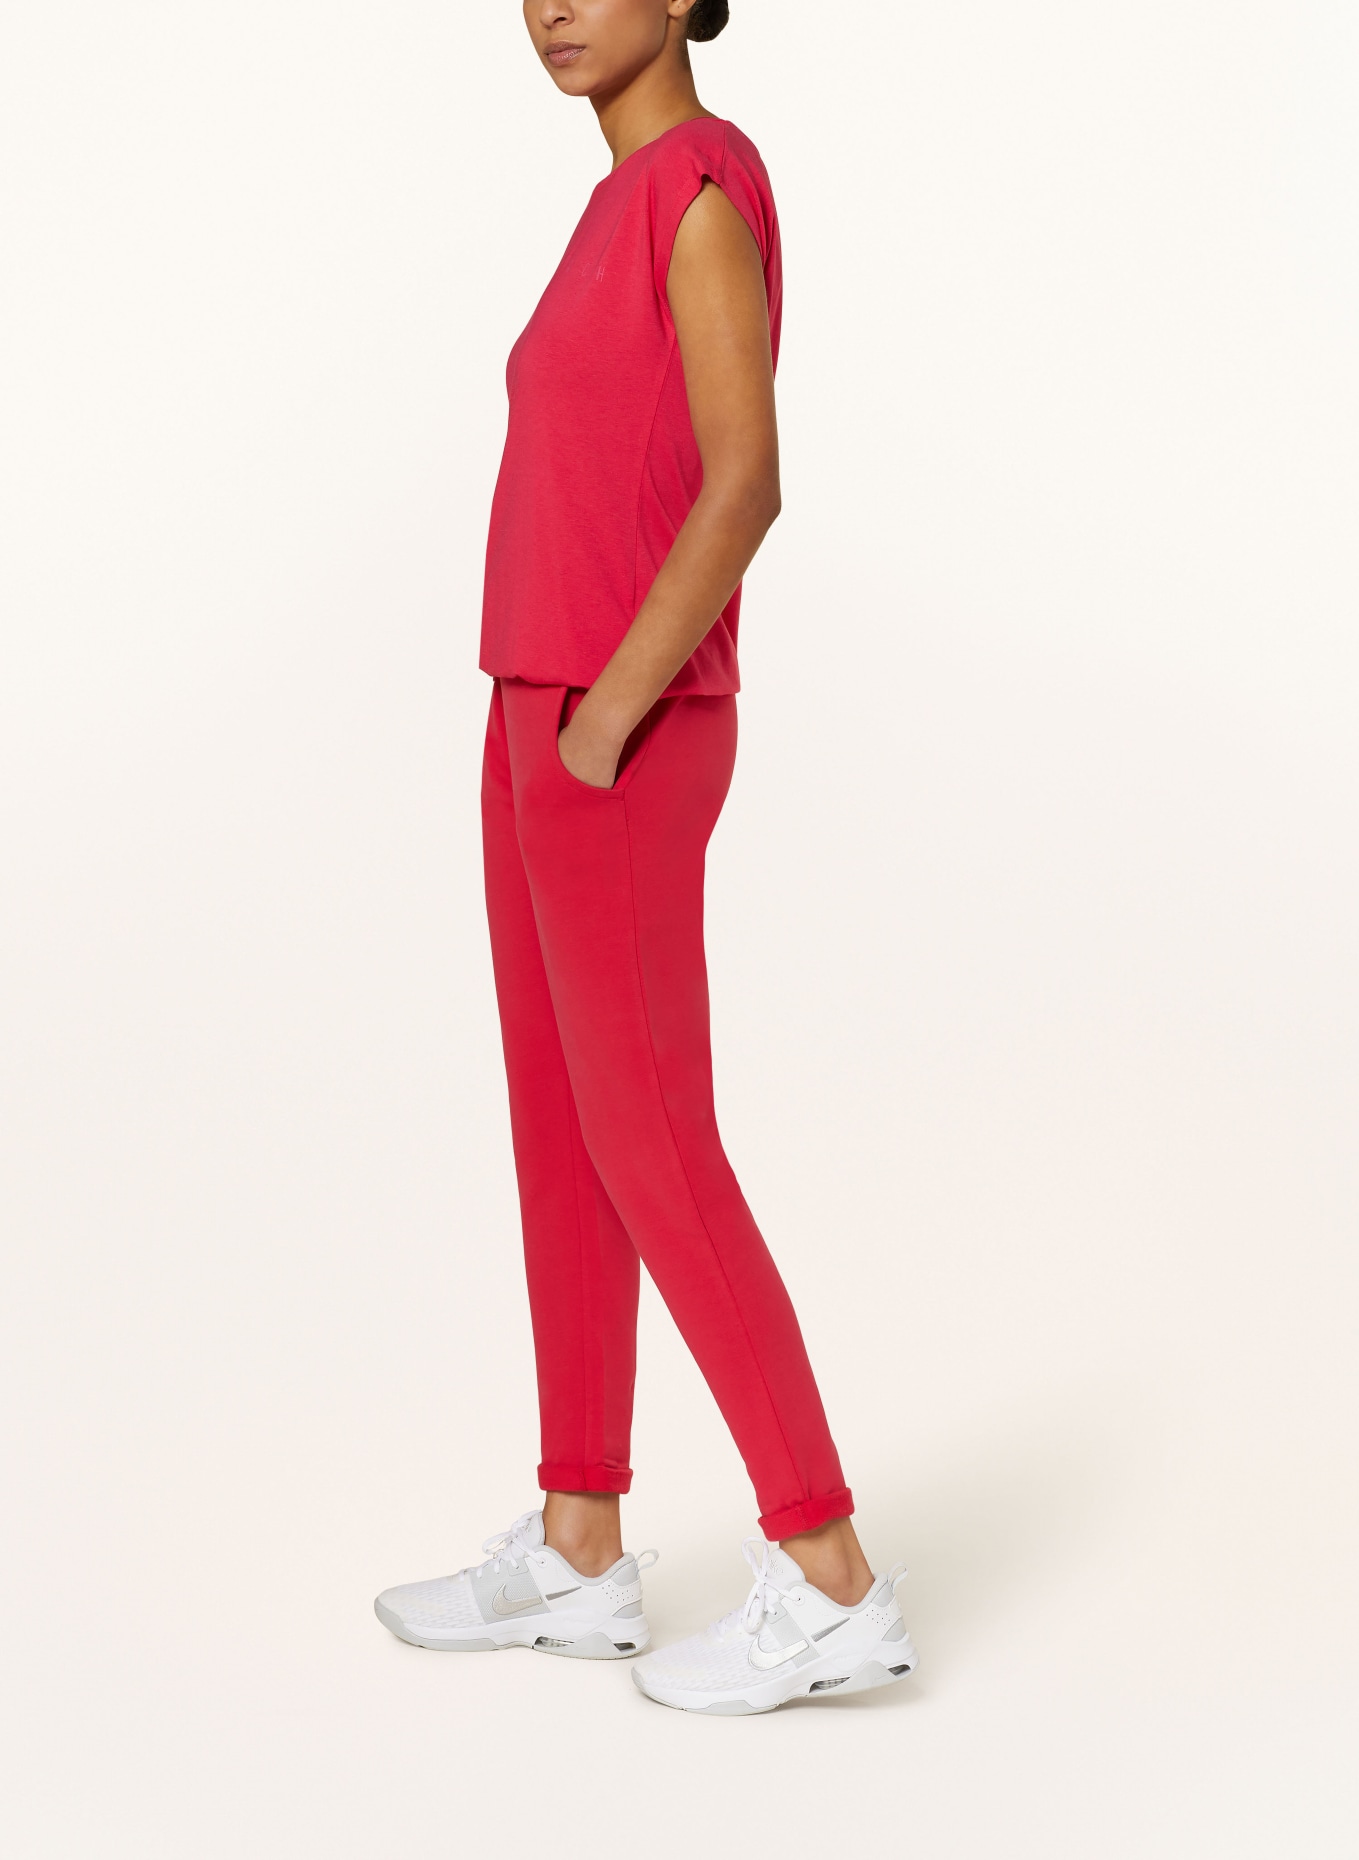 VENICE BEACH Sweatpants SHERLY, Color: RED (Image 4)